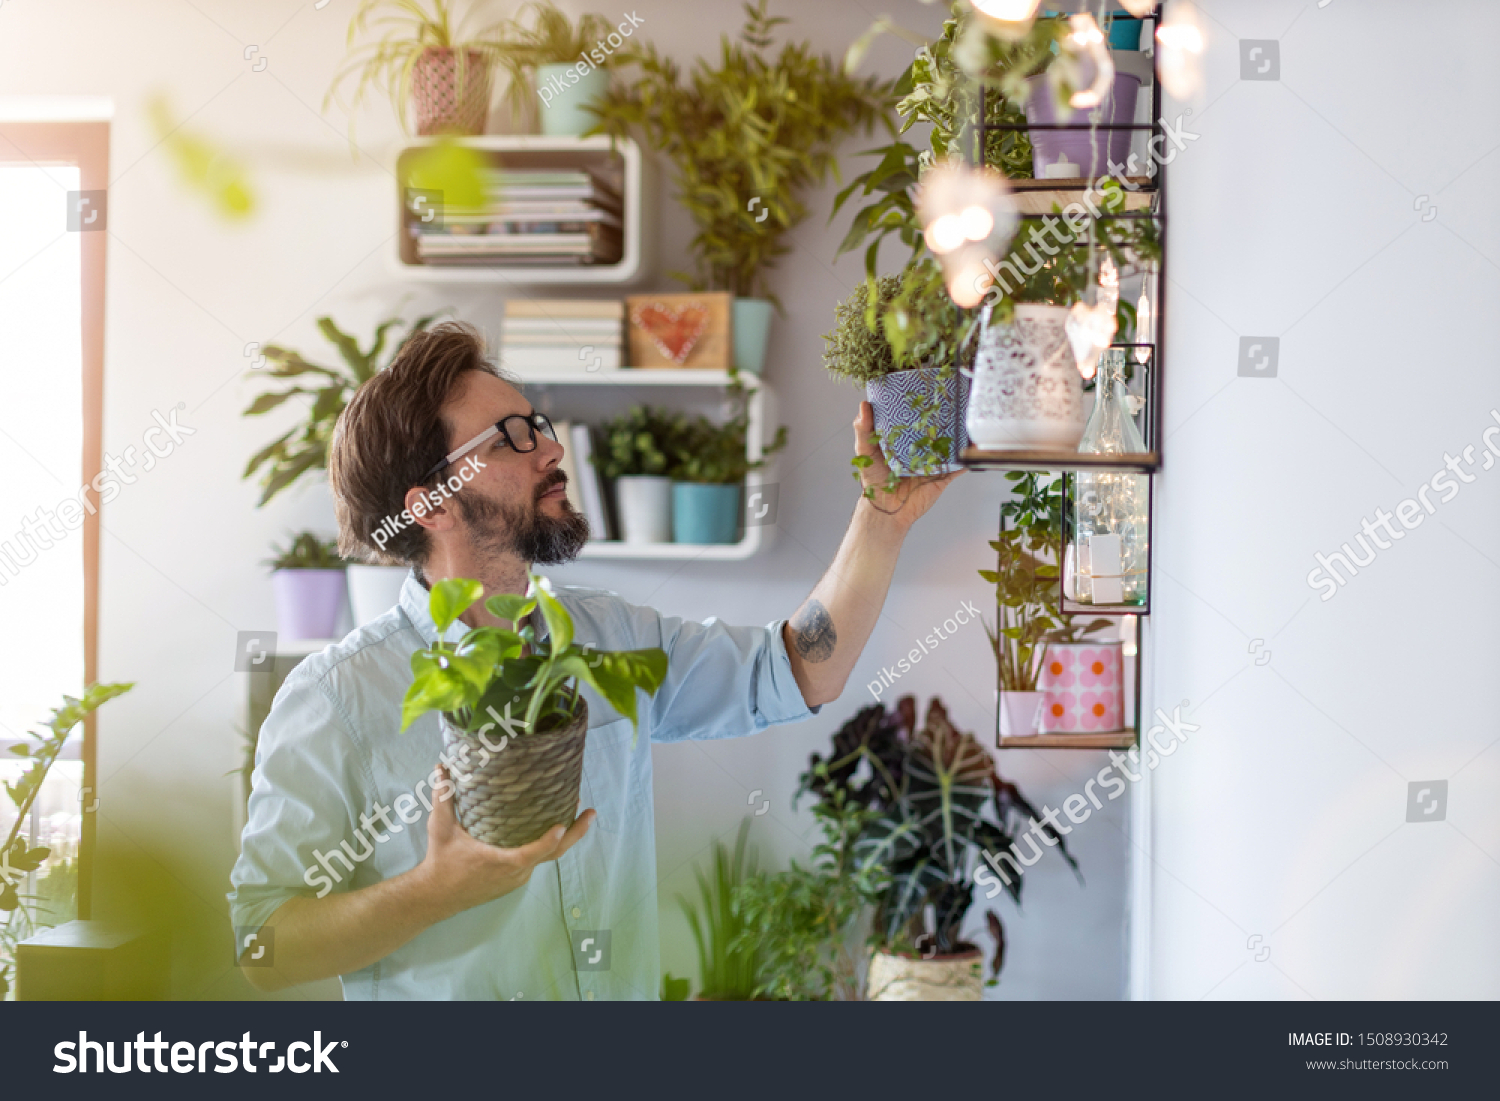 Man taking care of her potted plants at home
 #1508930342